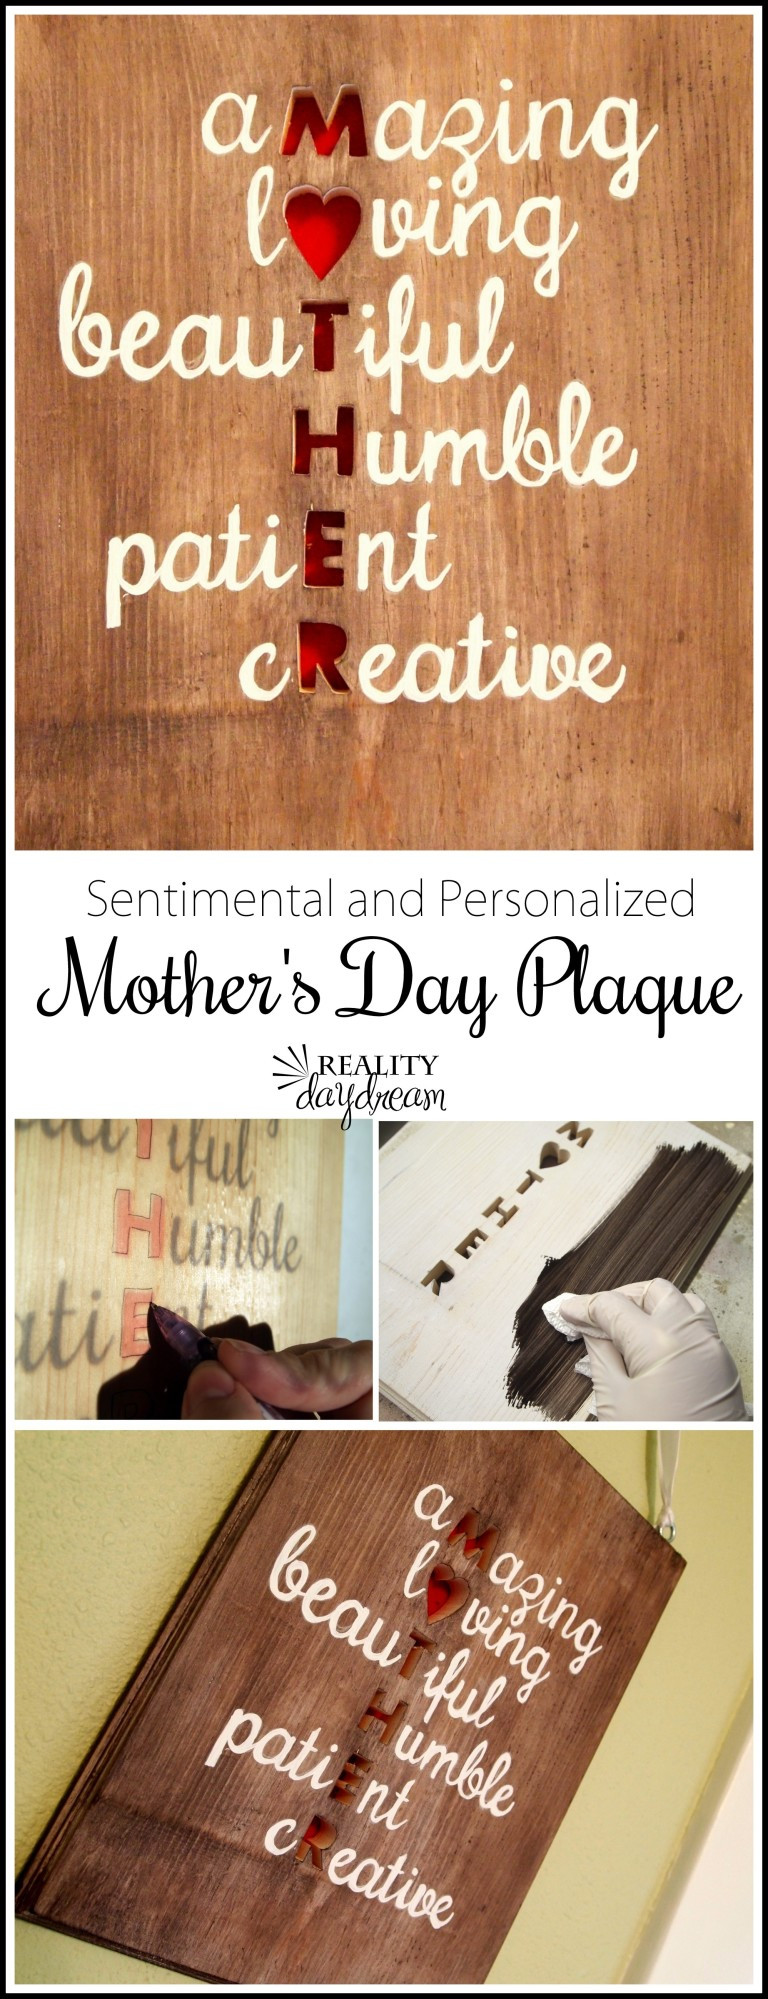 DIY Gift For Your Mom
 15 Wonderful Last Minute DIY Mother s Day Gift Ideas In